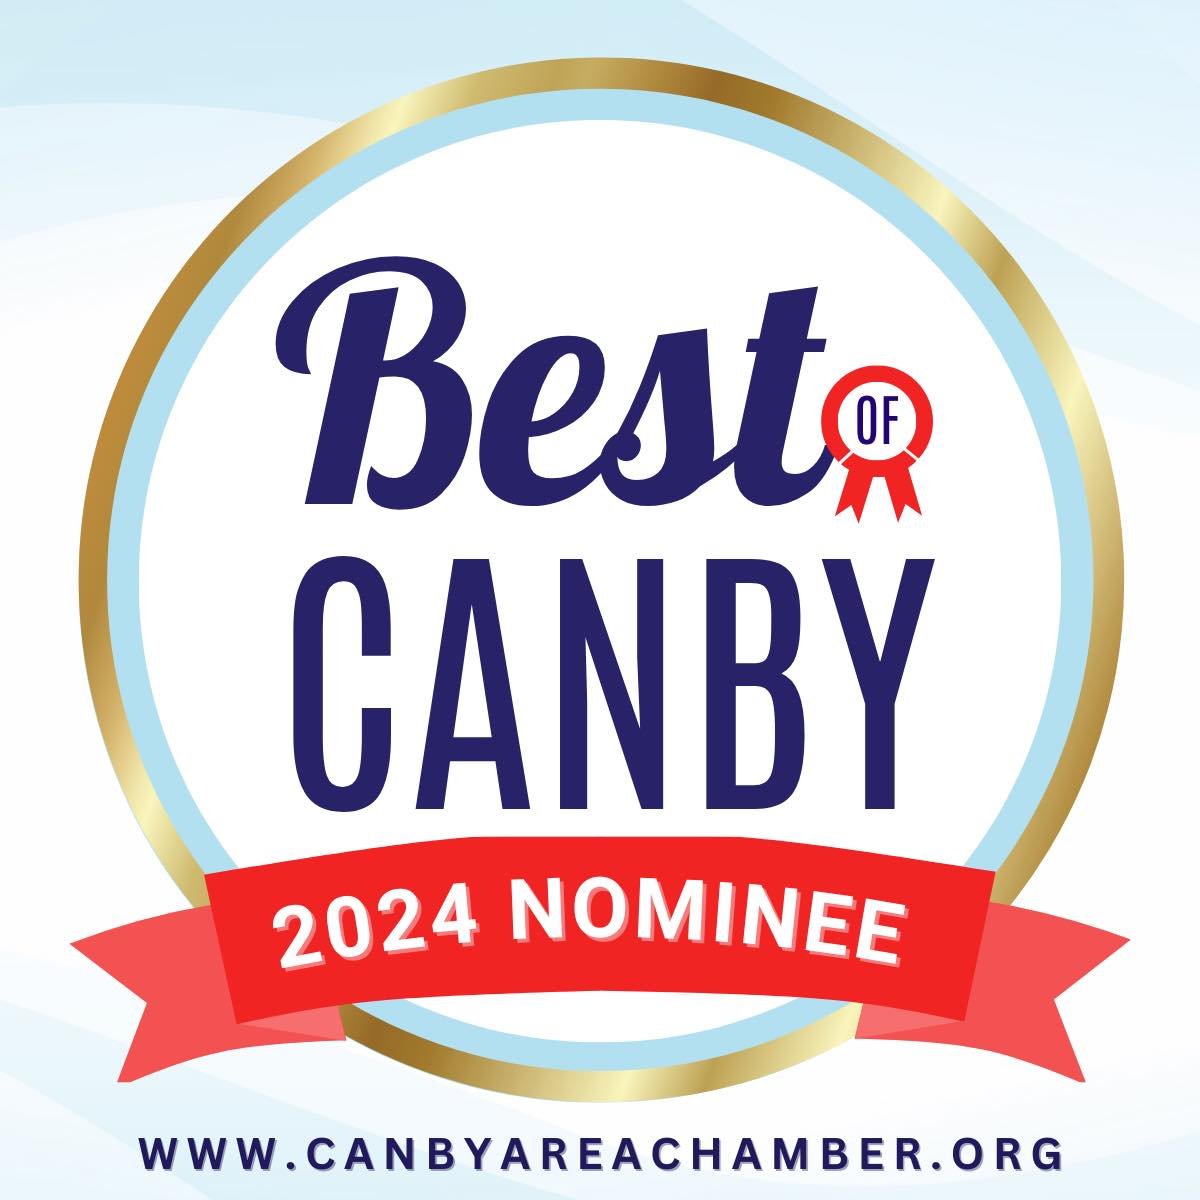 We have been nominated for Best of Canby, in a few different categories! If you could take a moment and vote for us, and all your fave local spots, we would be honored! Now through May 15th. htps://canbyareachamber.org/events/bestofcanbyawards